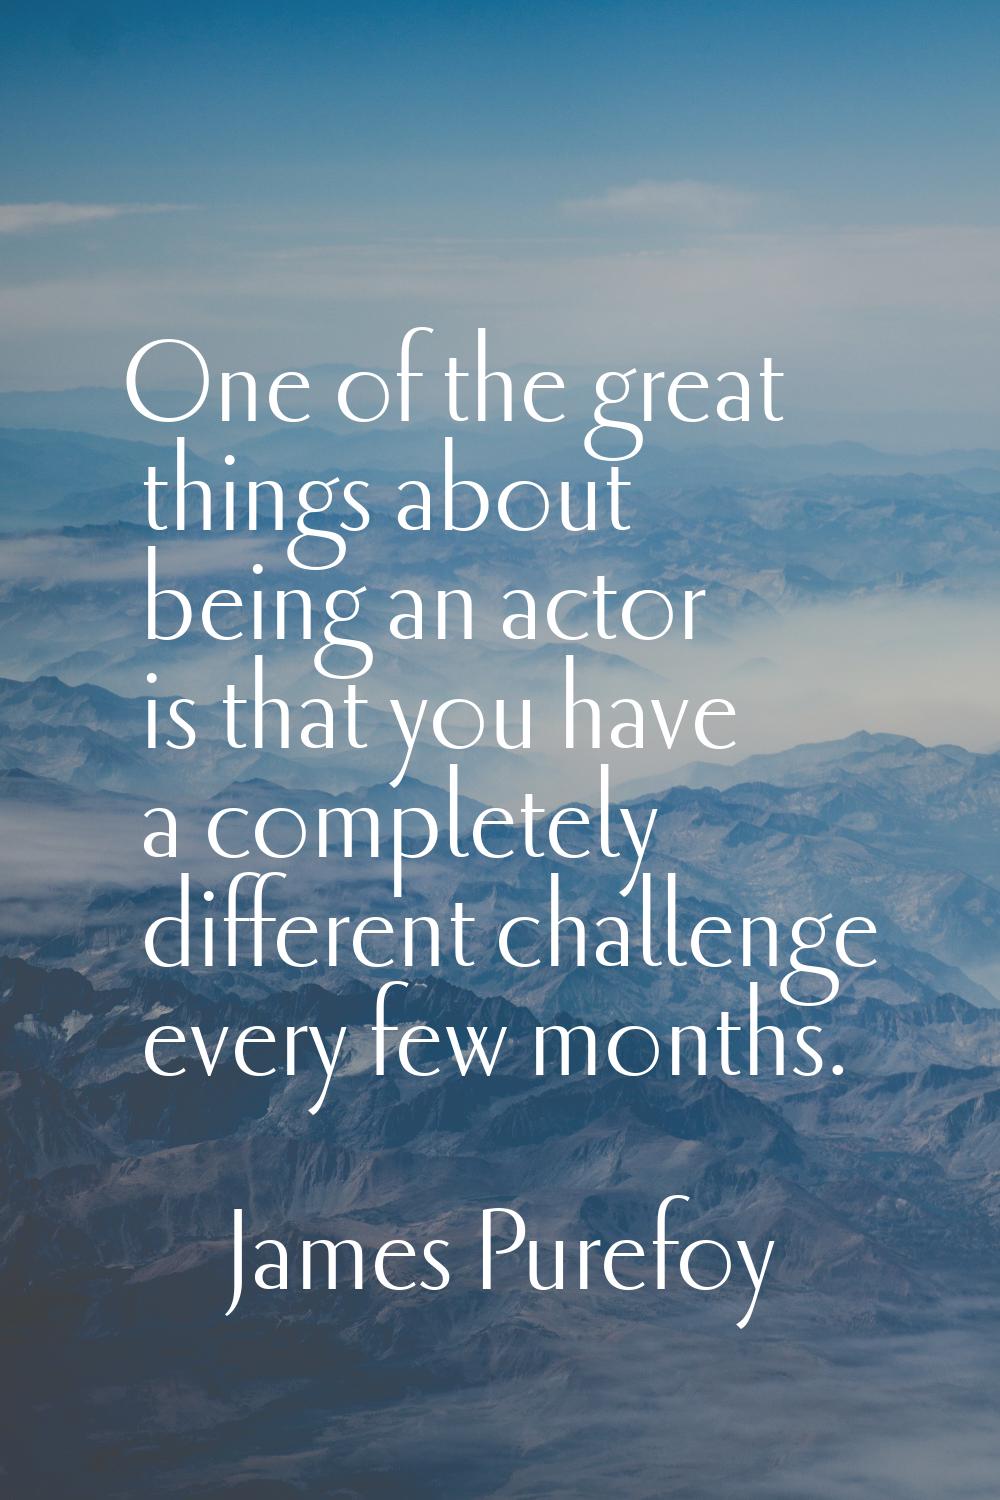 One of the great things about being an actor is that you have a completely different challenge ever